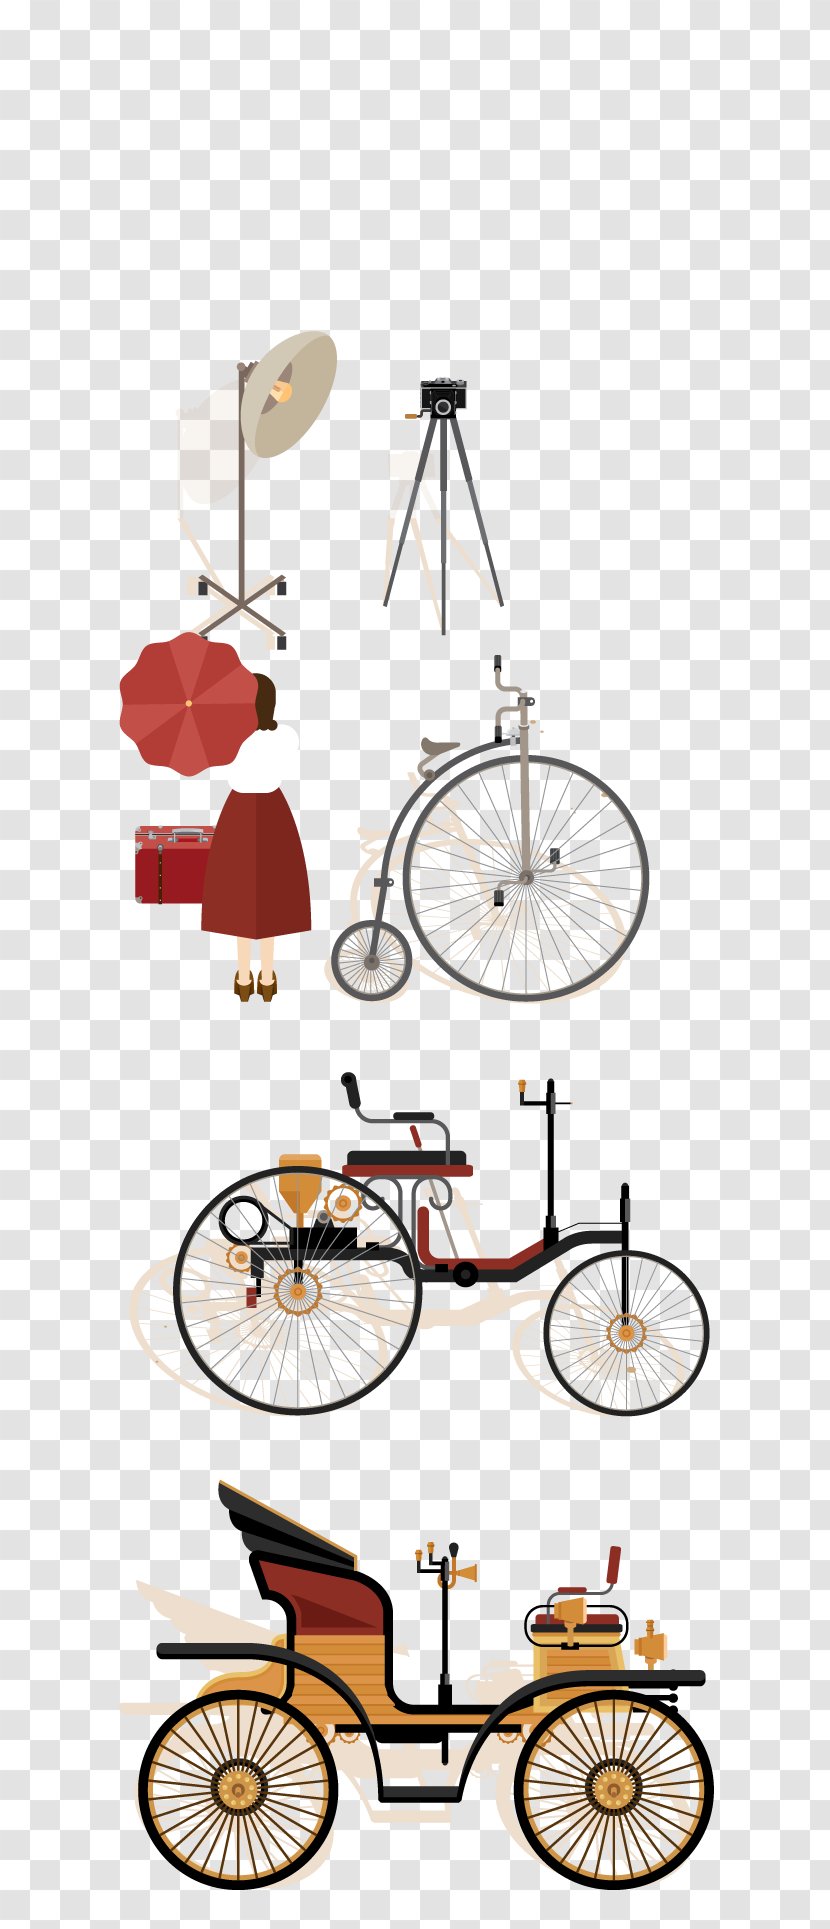 Object Clip Art - Library - Bicycle Transparent PNG